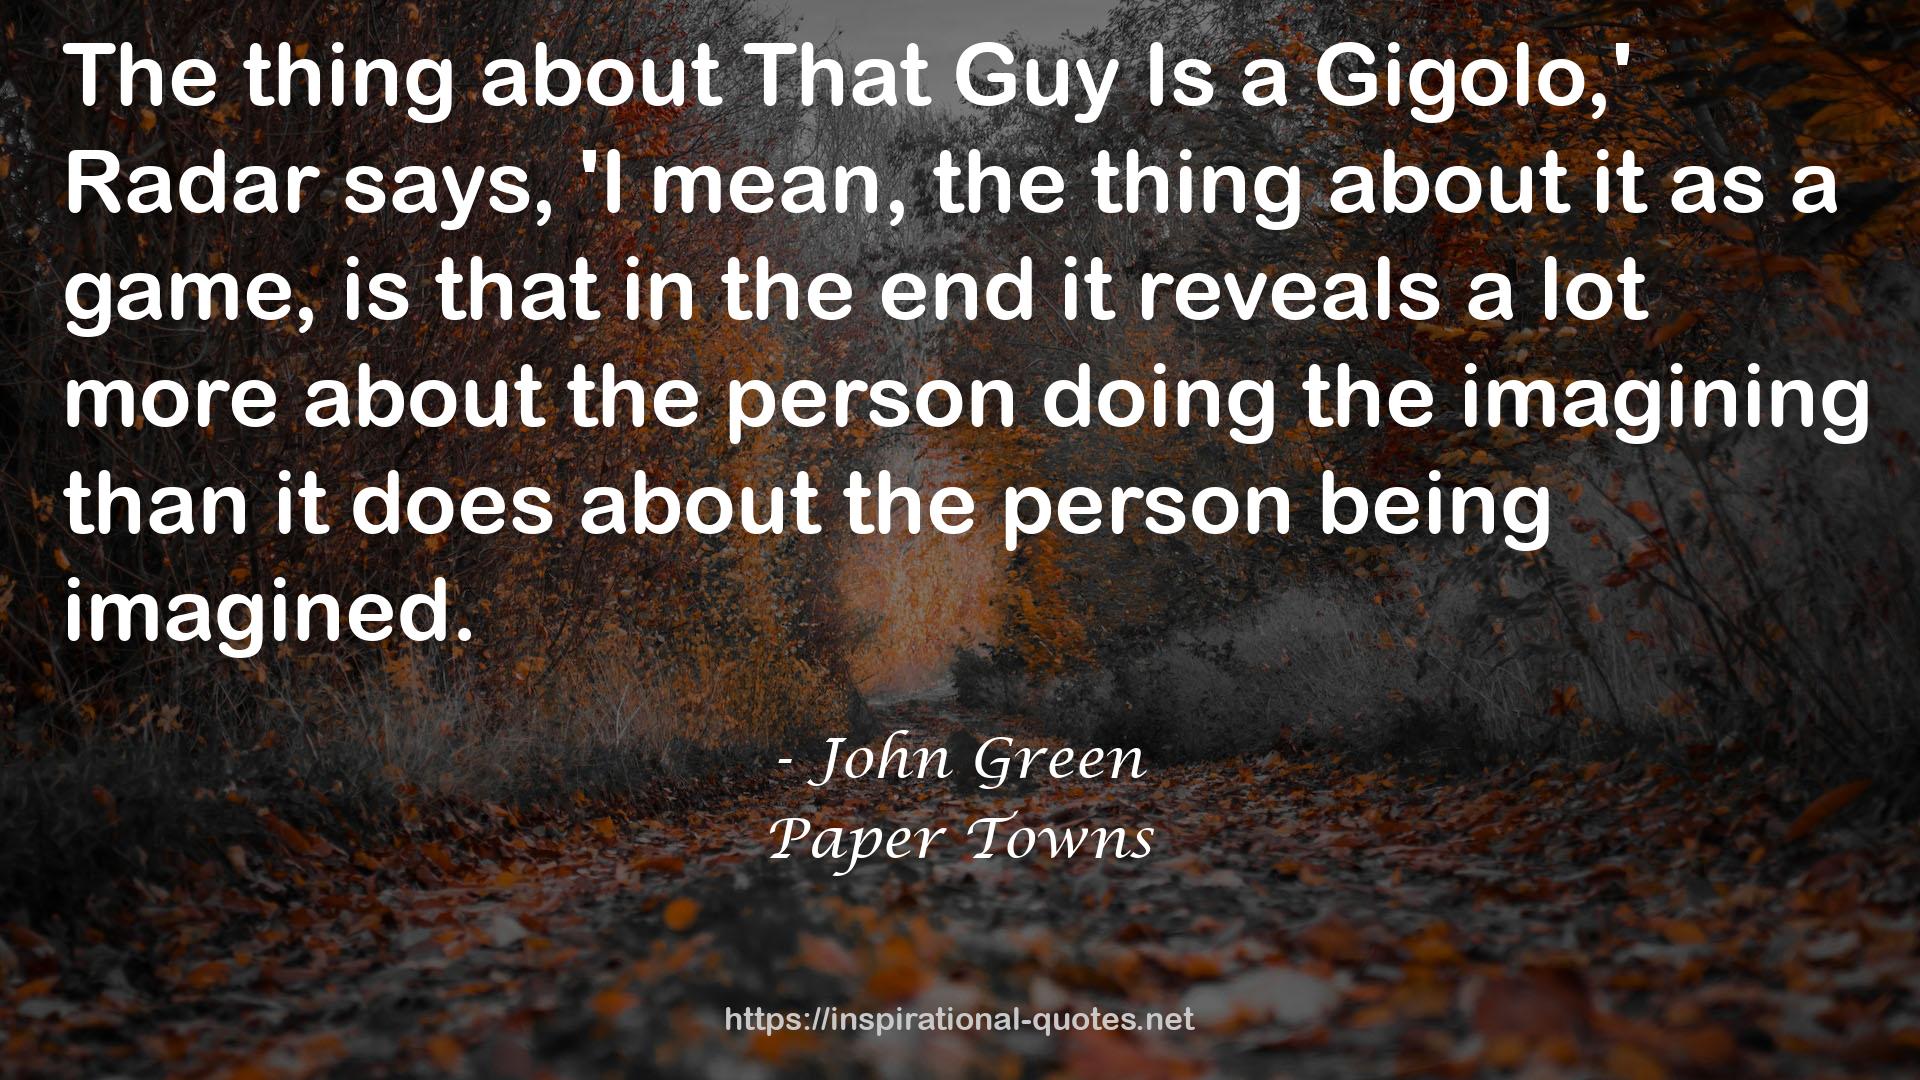 Paper Towns QUOTES